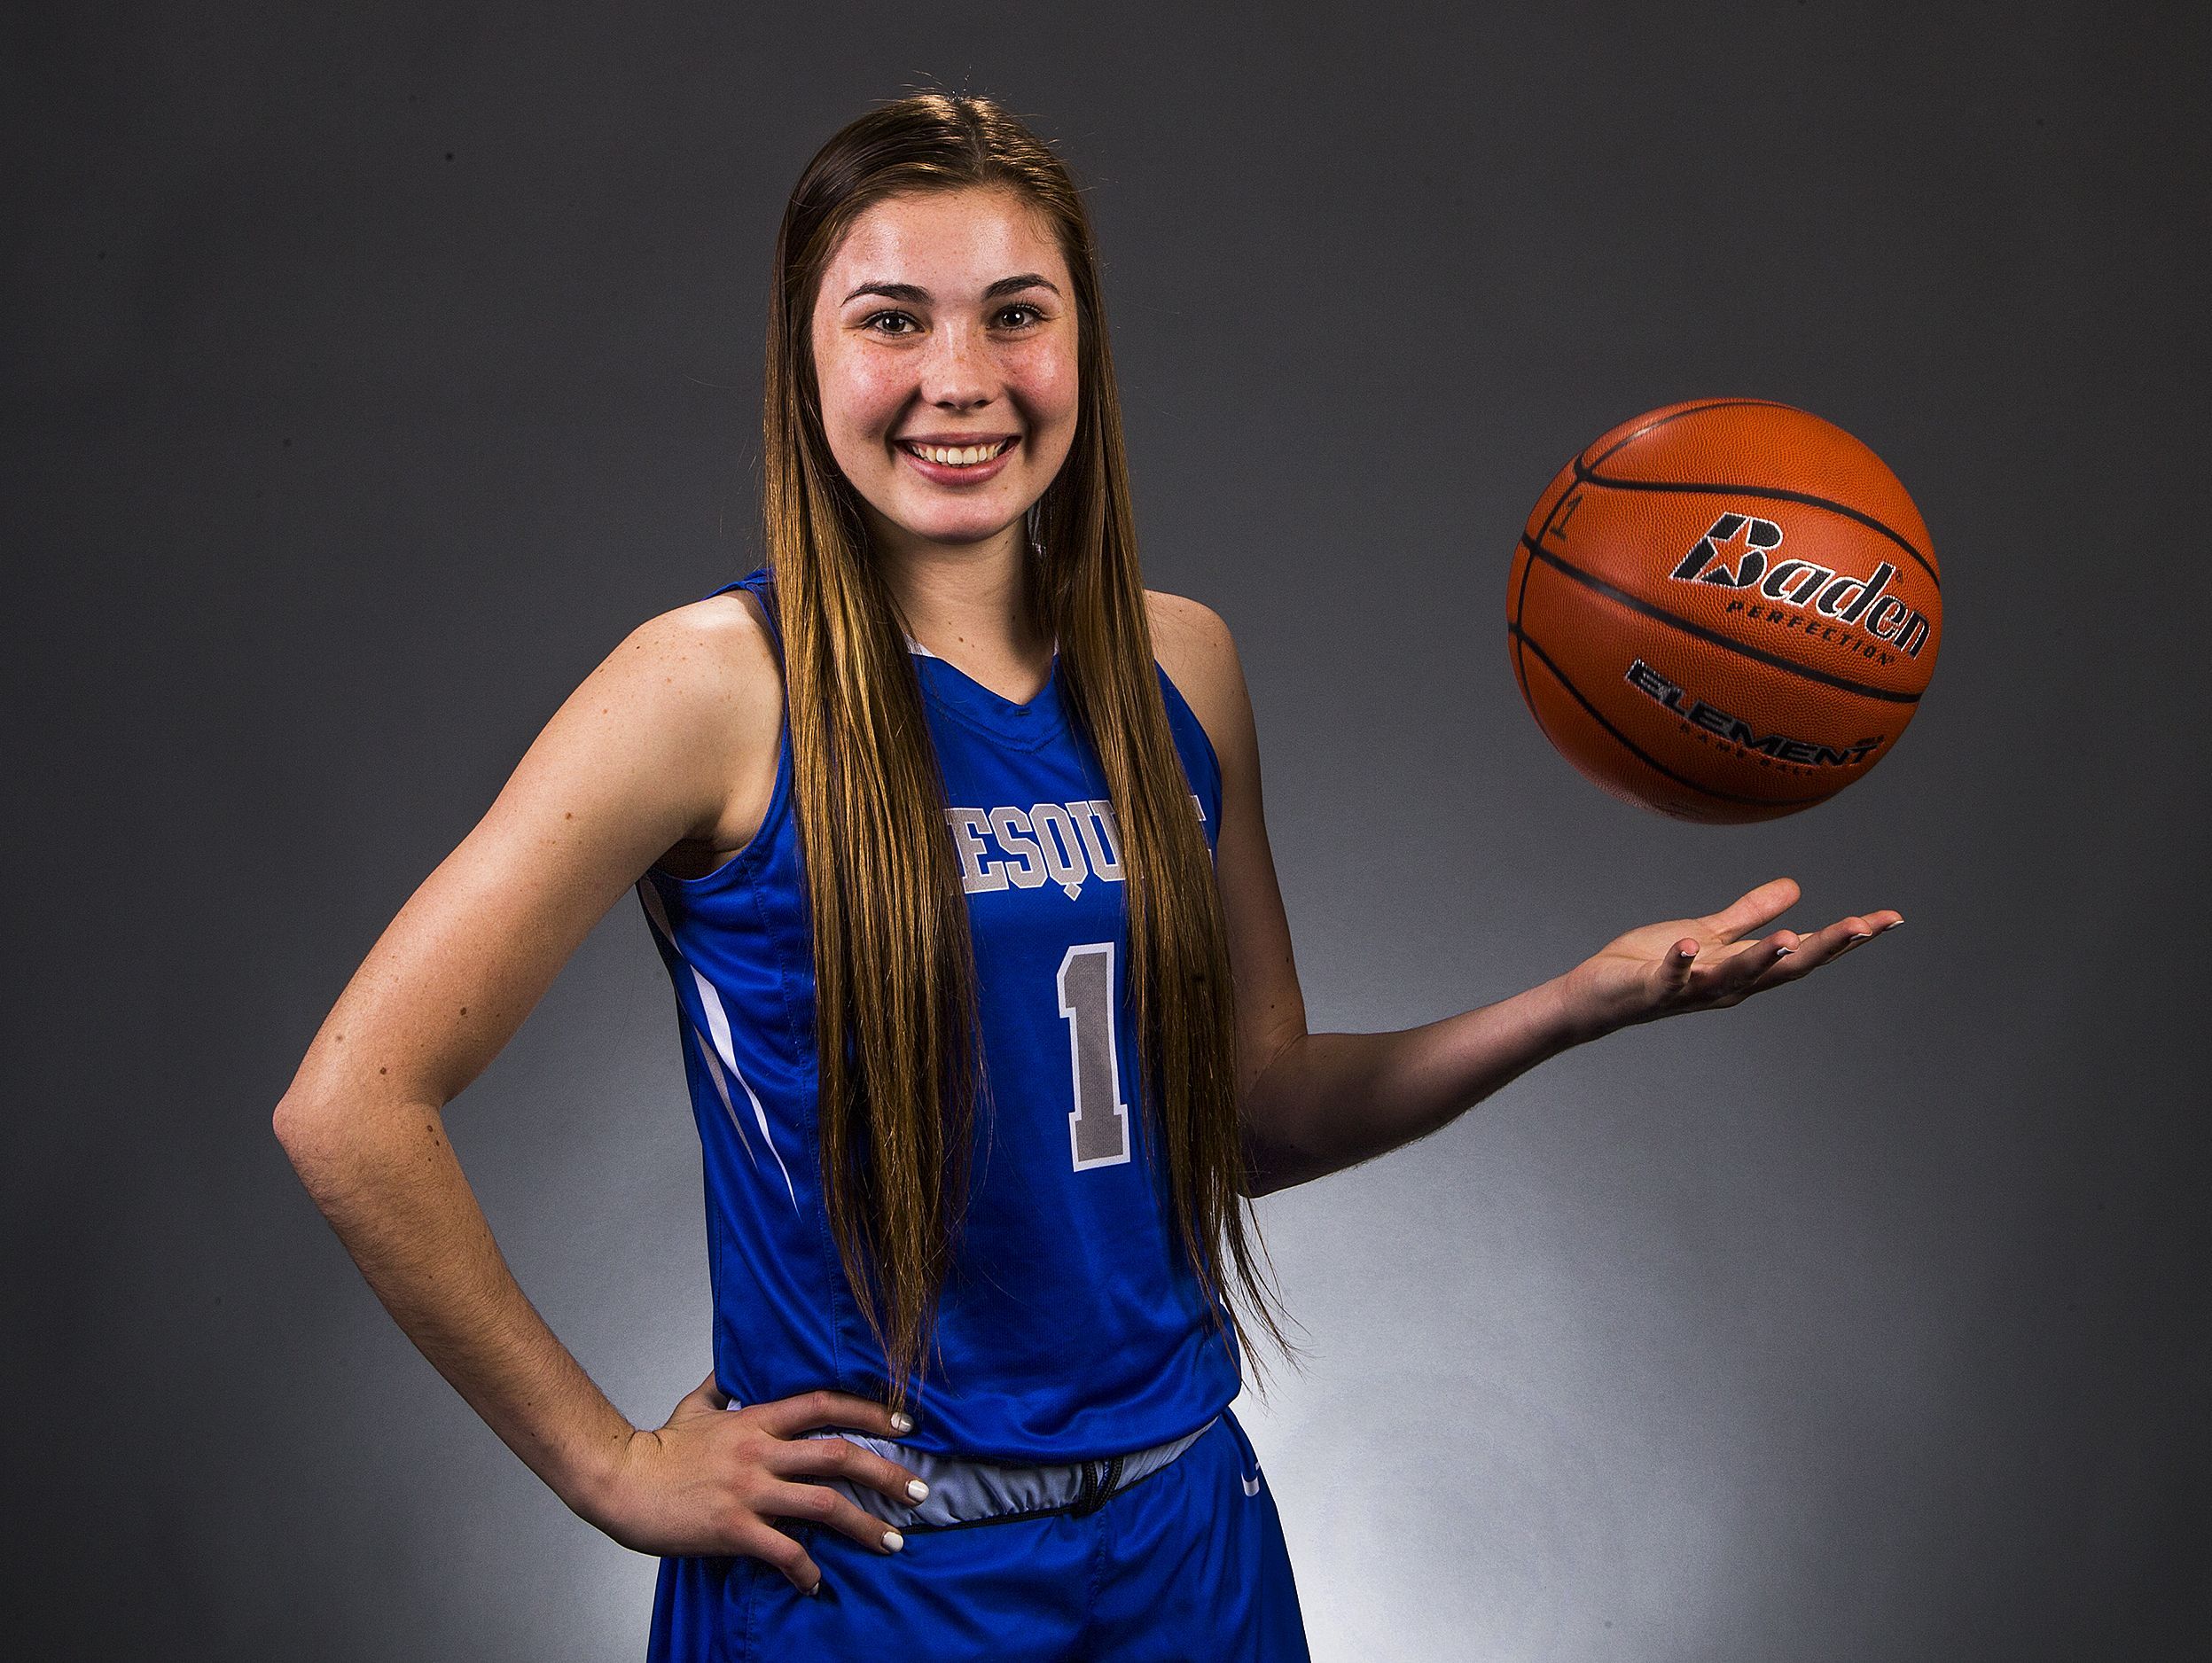 Gilbert Mesquite junior guard Shaylee Gonzales is a finalist for the azcentral.com Sports Awards Big Schools Girls Basketball Athlete of the Year award.